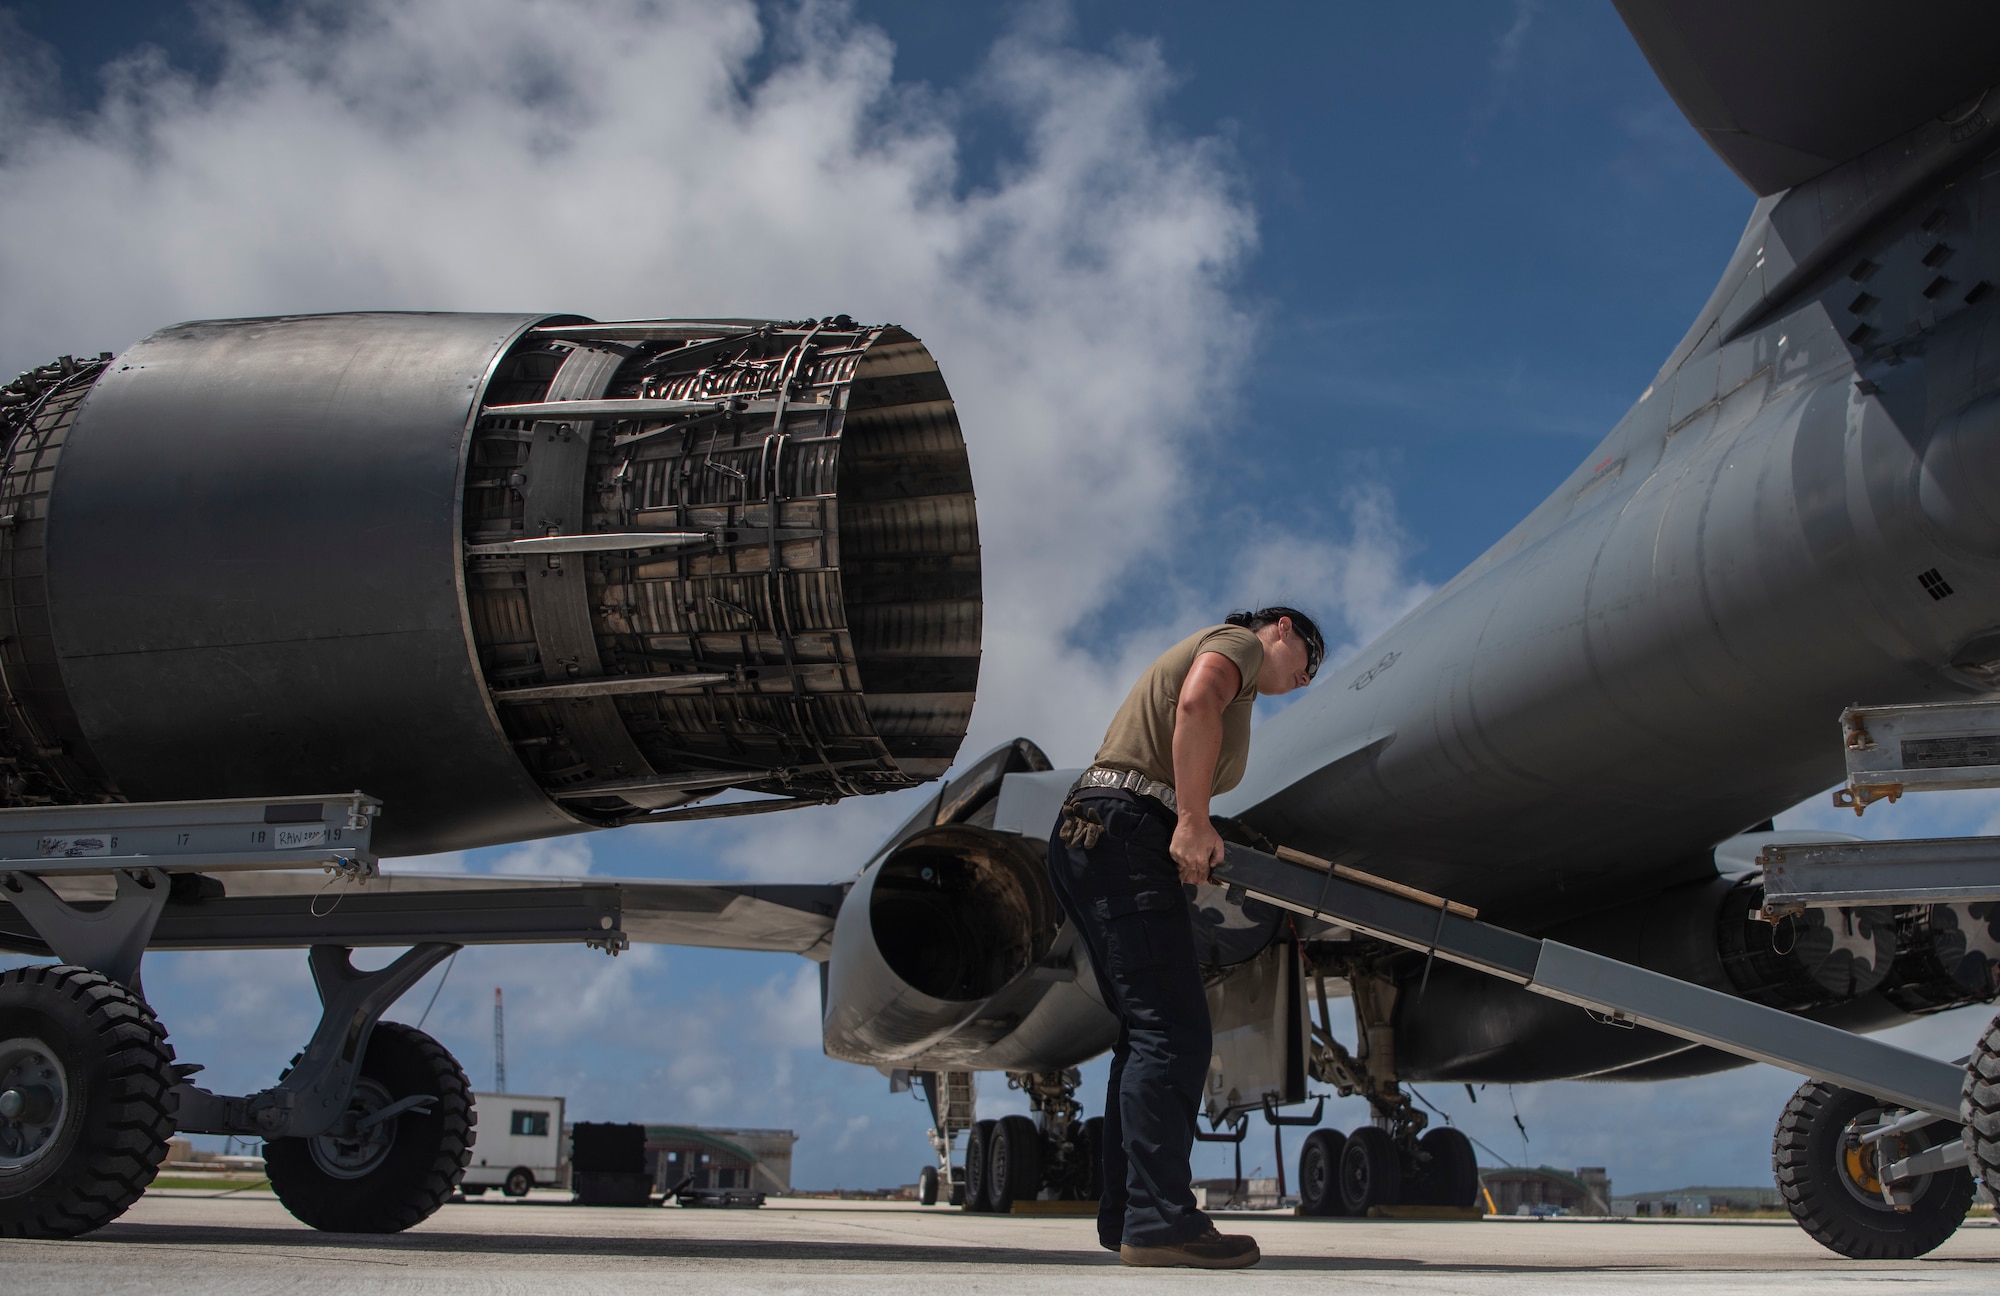 Senior Airman Shelby Ries, 7th Aircraft Maintenance Squadron aerospace propulsion mechanic, loads an engine onto a trailer at Andersen Air Force Base, Guam, May 3, 2020. The B-1 has four engines that can produce 30,000 lbs. of thrust each. Four B-1Bs deployed to Andersen as part of U.S. Strategic Command’s support to the National Defense Strategy objectives of strategic predictability and operational unpredictability by using a mix of different aircraft to and from various dispersed U.S. bases and other departure and arrival points, to include Guam. (U.S. Air Force photo by Senior Airman River Bruce)